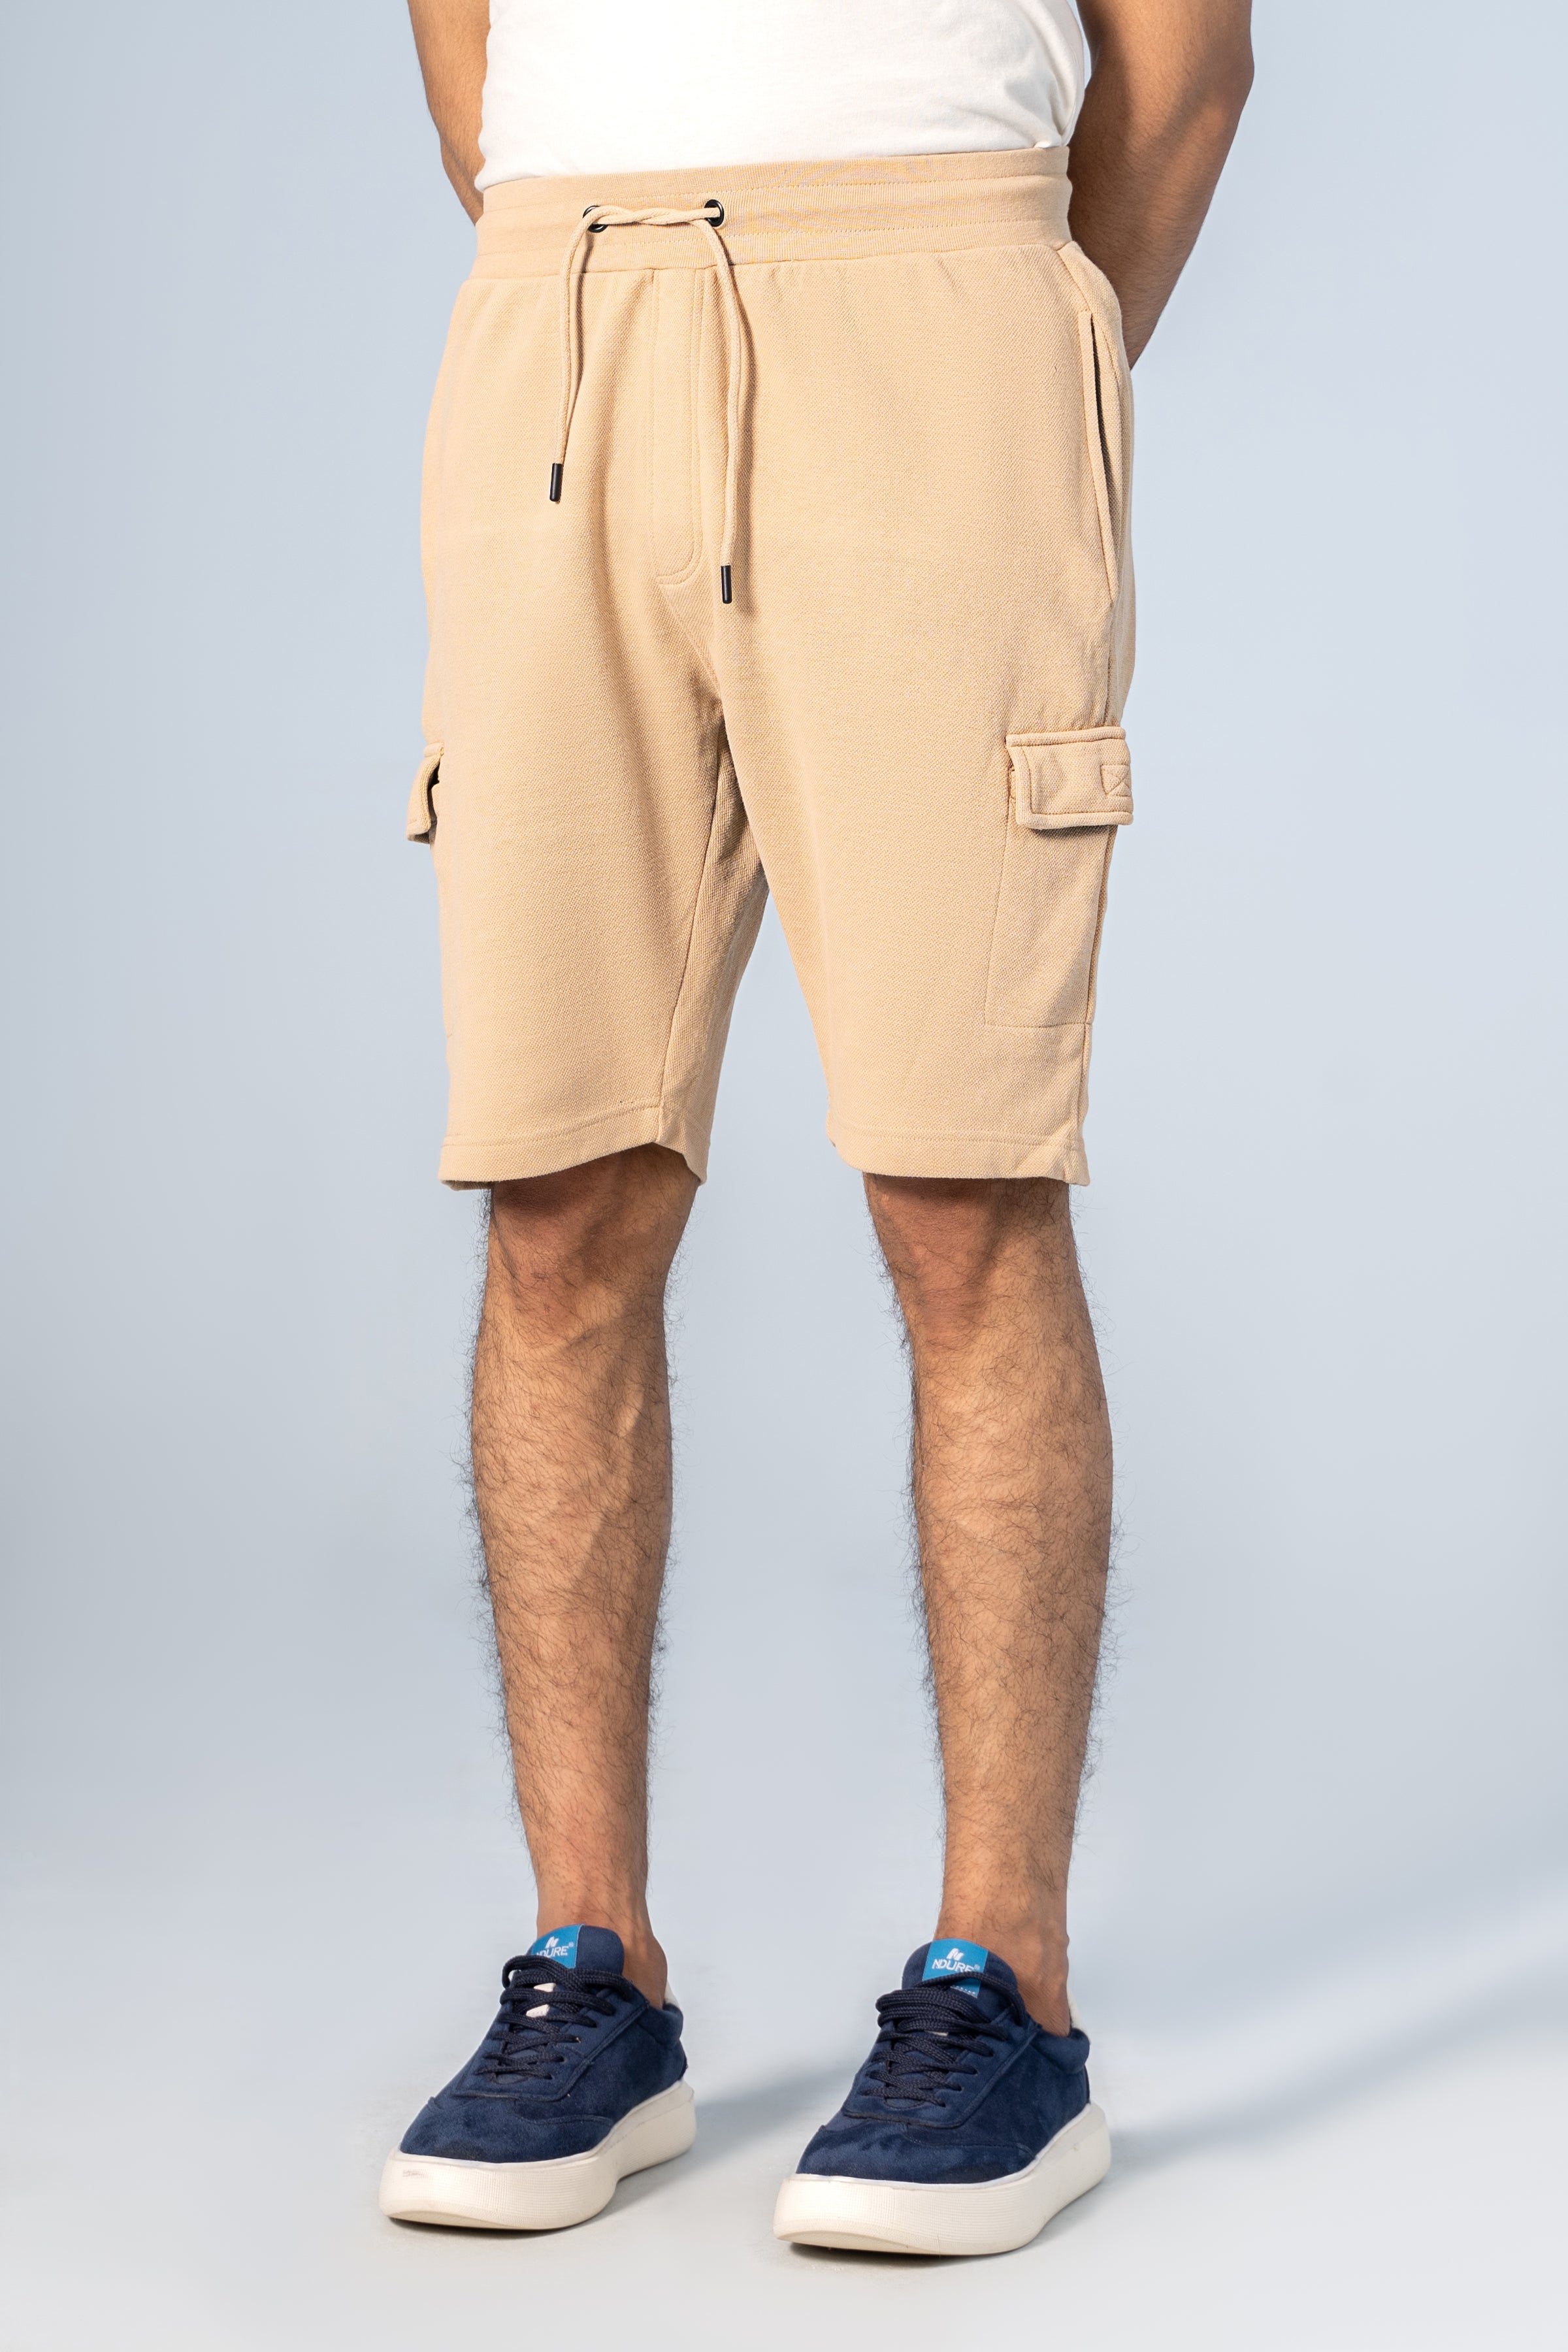 PIQUE TERRY CARGO SHORTS REGULAR FIT BEIGE - Charcoal Clothing